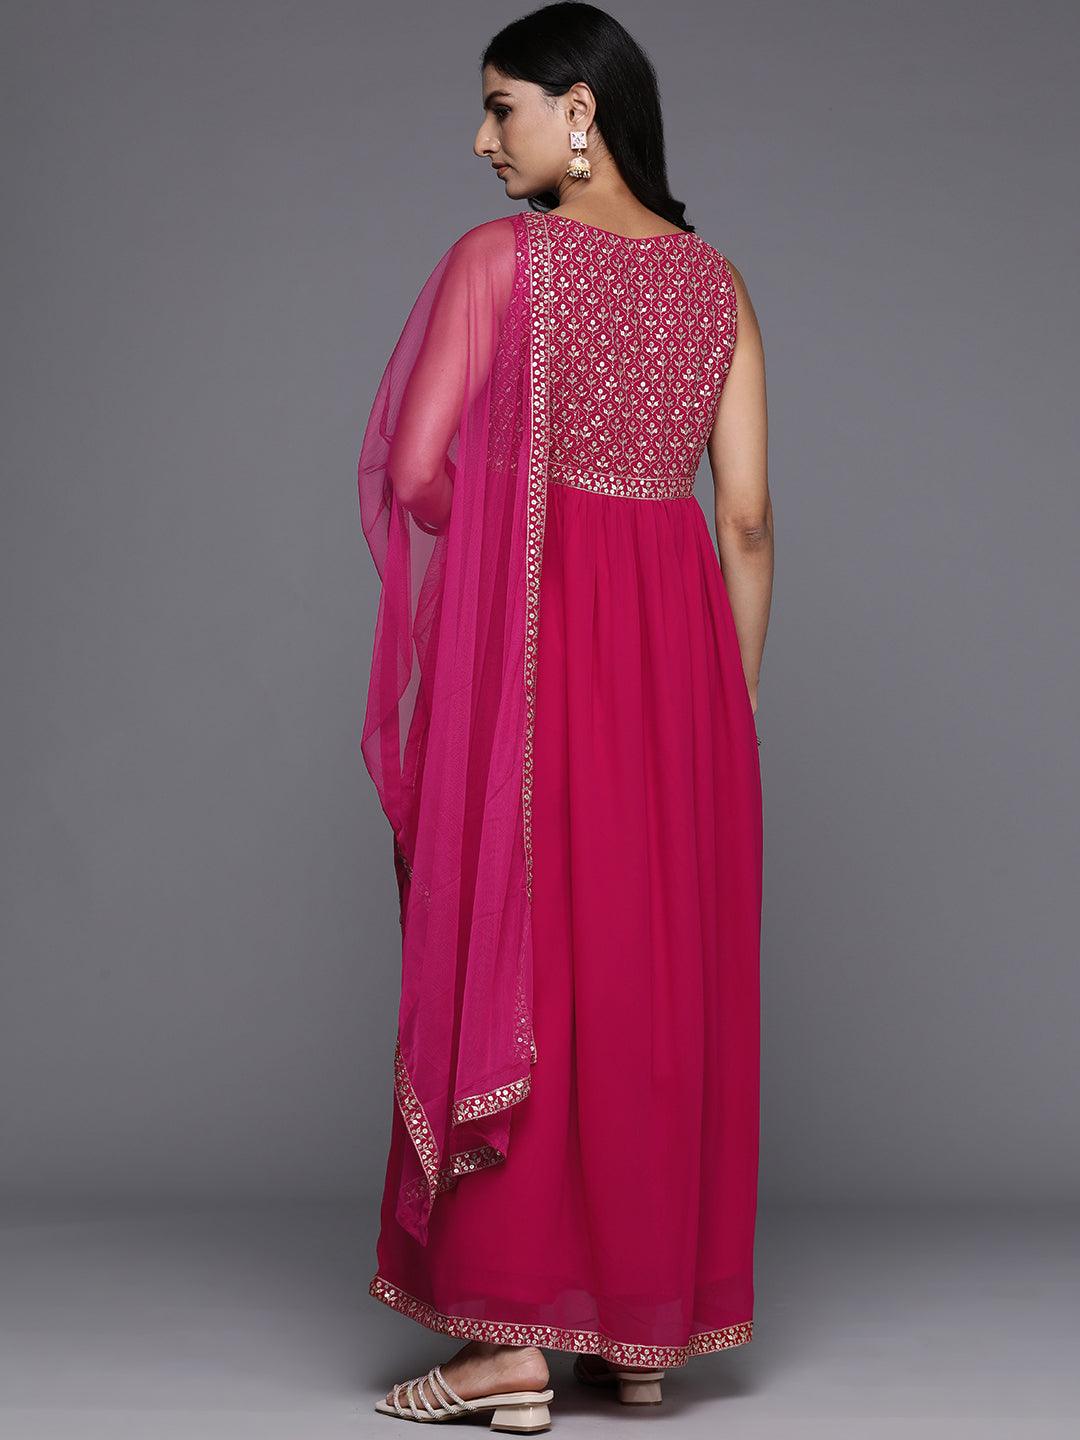 Pink Embroidered Georgette Anarkali Suit With Dupatta